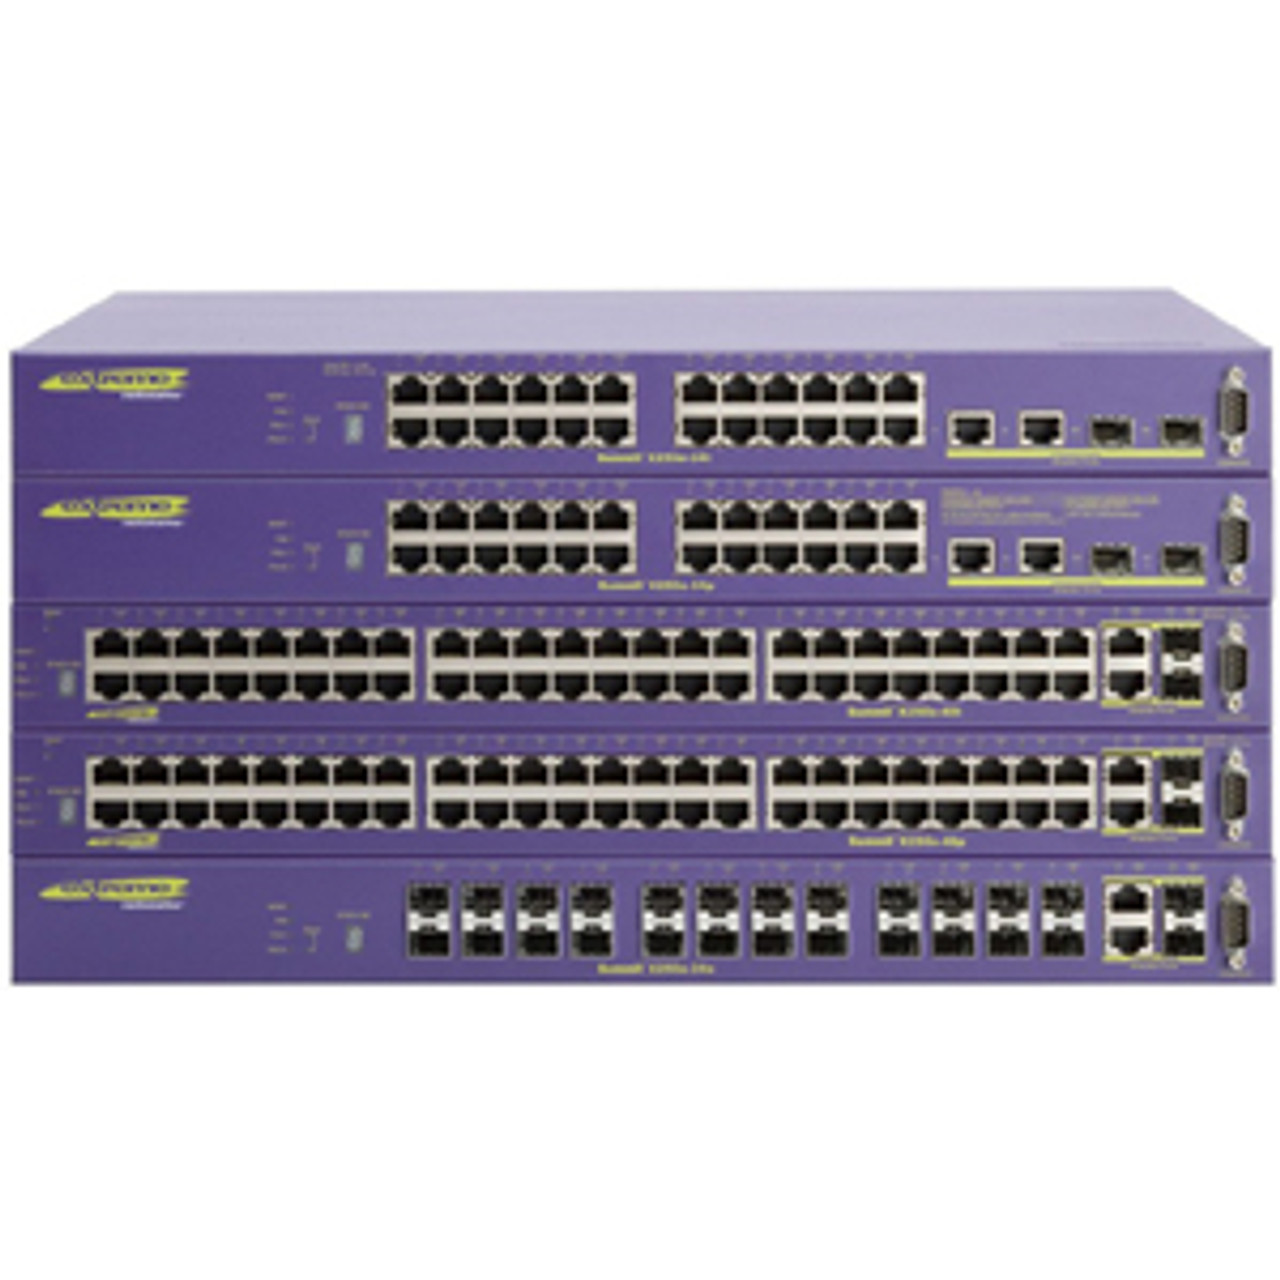 15105T Extreme Networks Smt 24-Ports Poe Switch Taa X250e-24p-taa Req Pwr Crd (Refurbished)